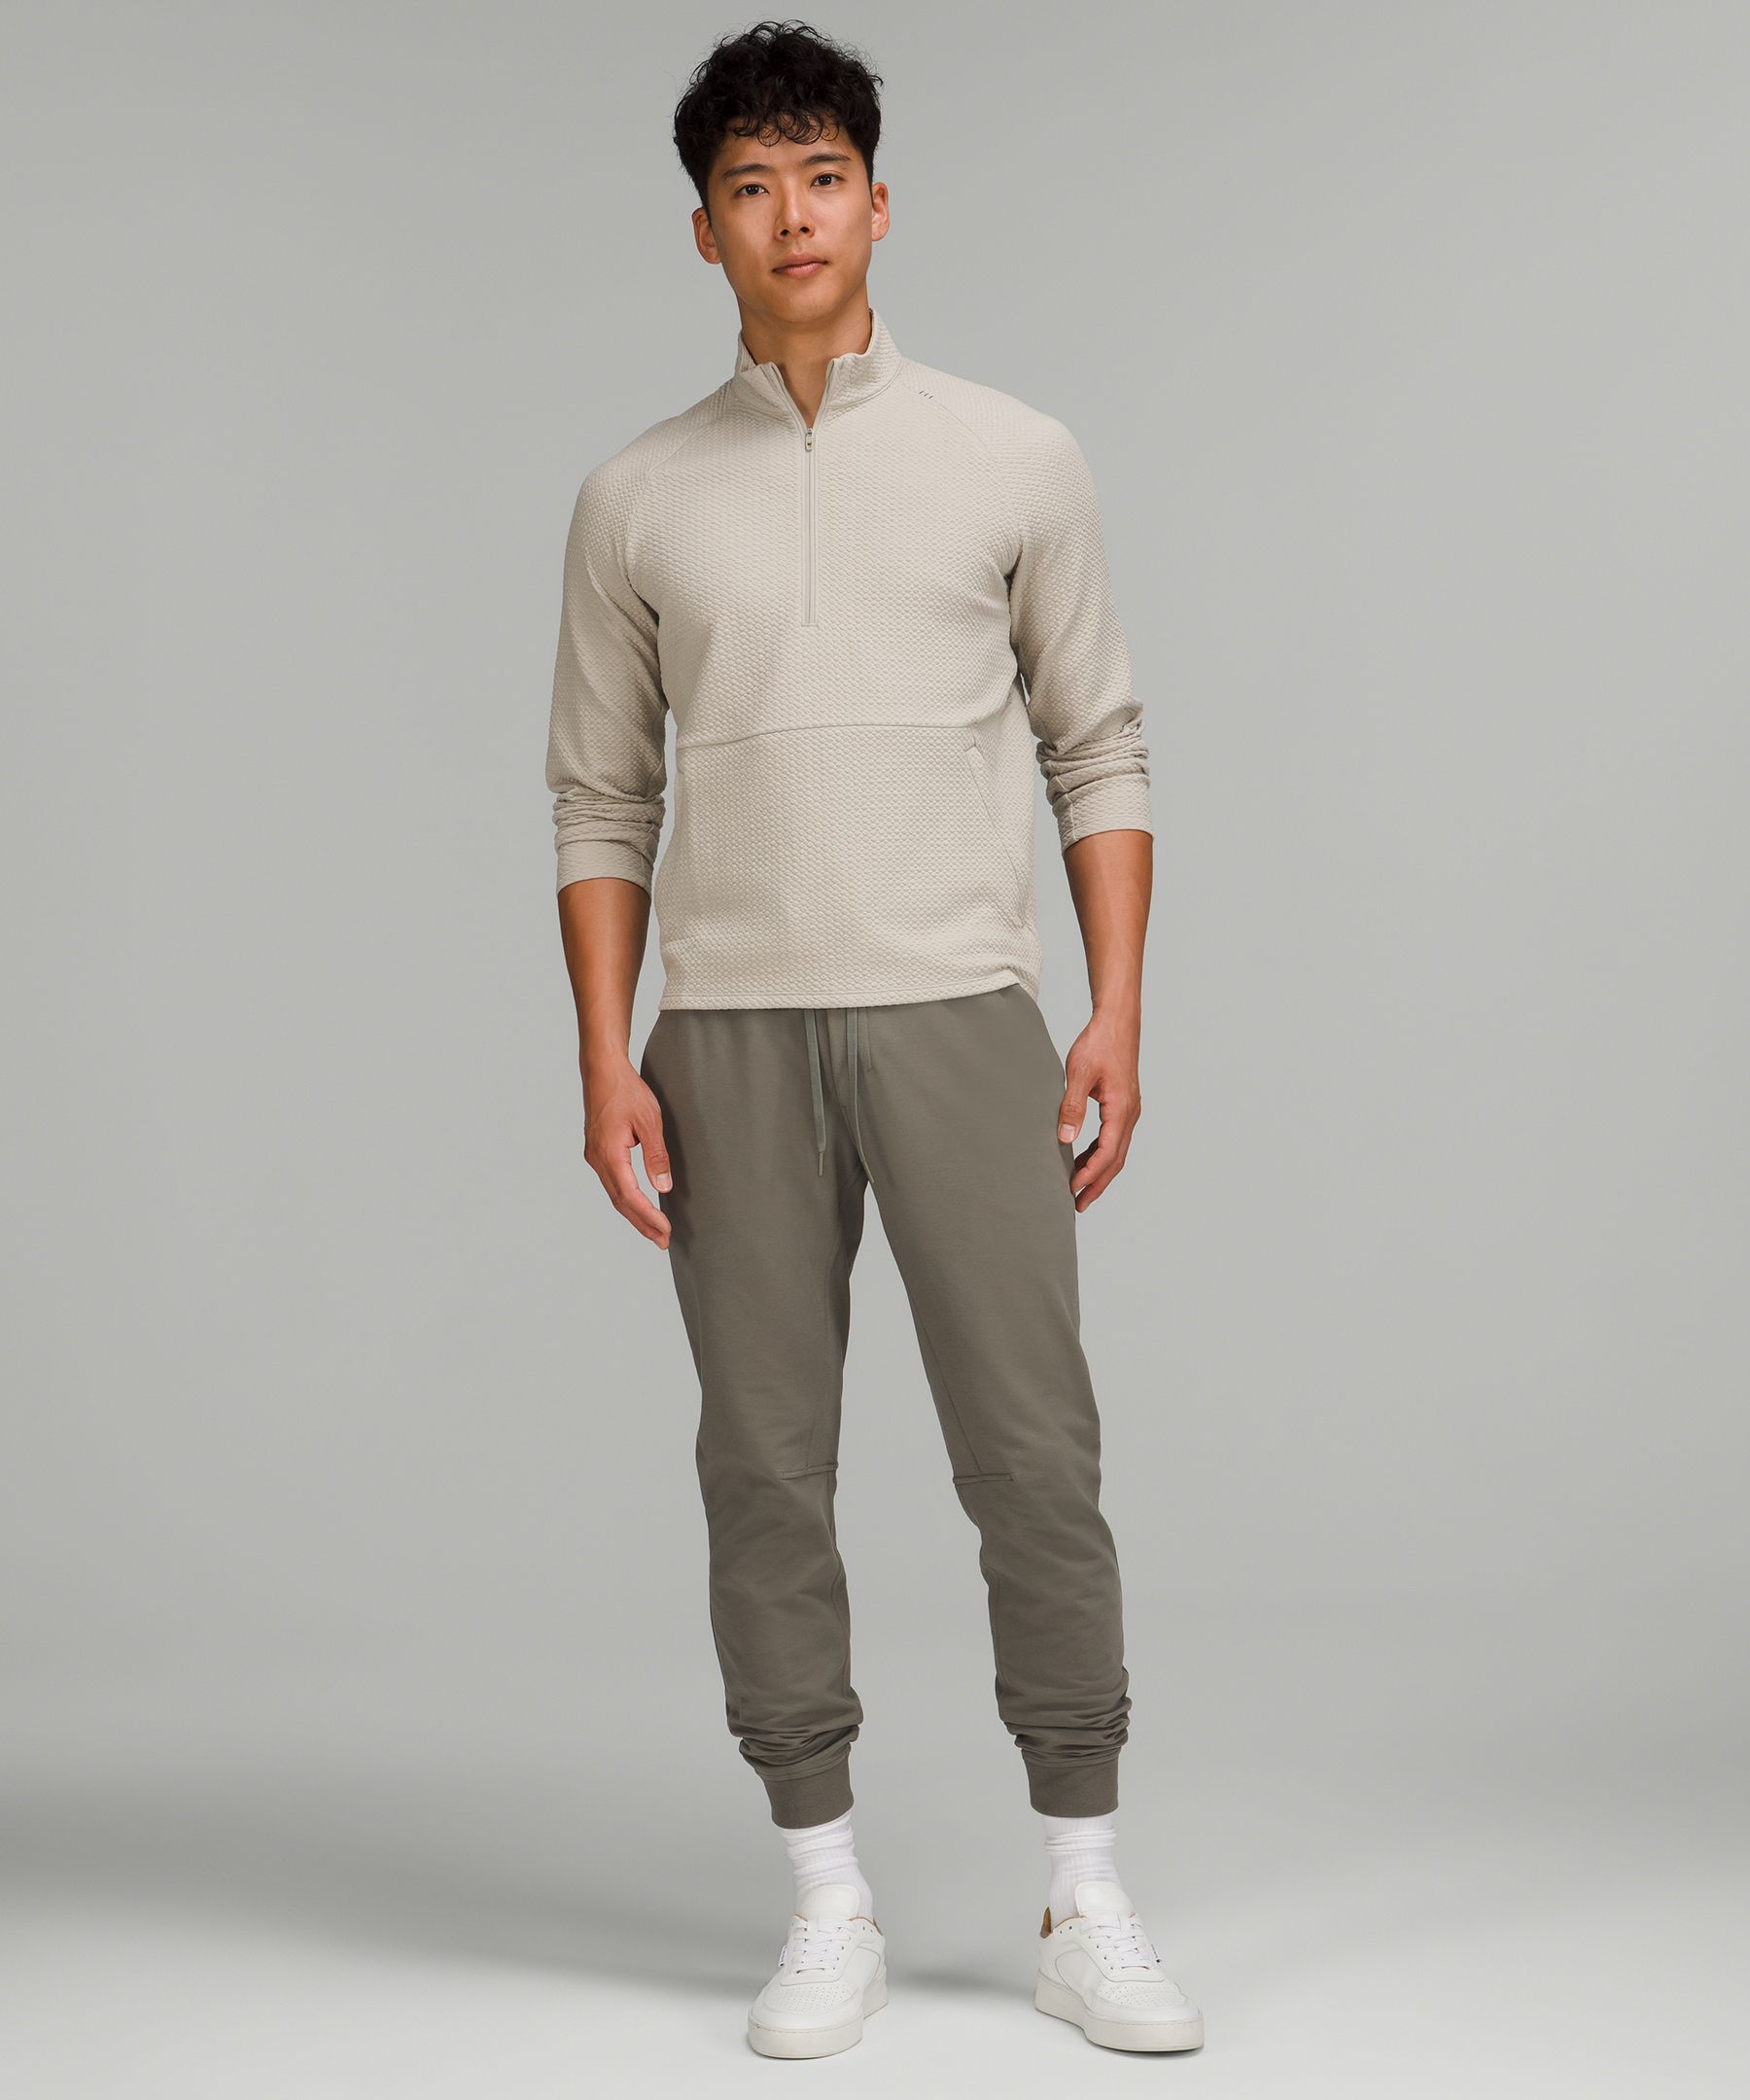 Why Our Tall Athletic Joggers Are Better Than Lululemon